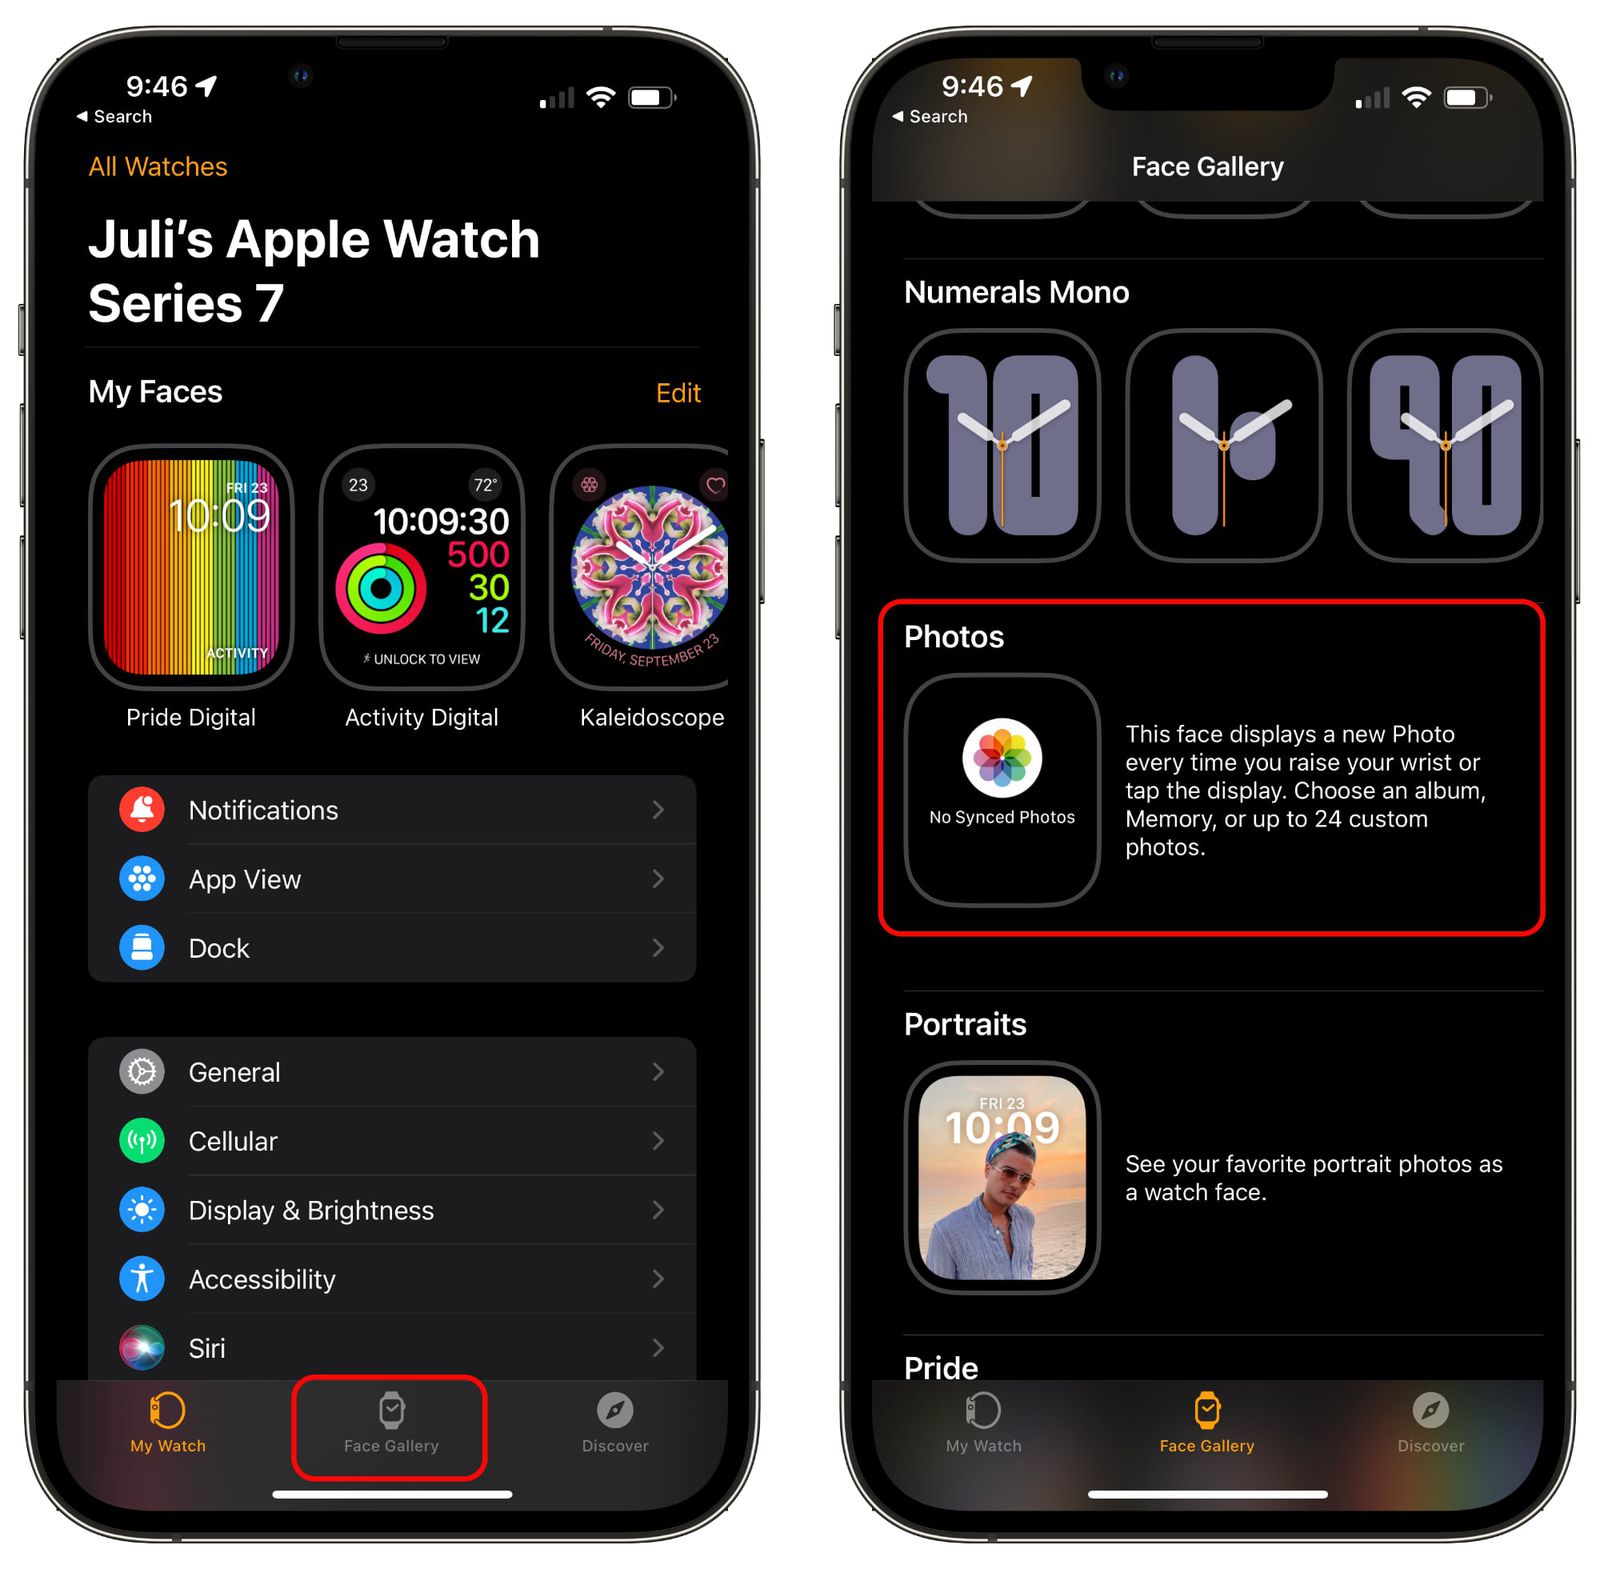 10 Tips for Getting the Most Out of Your New Apple Watch - MacRumors